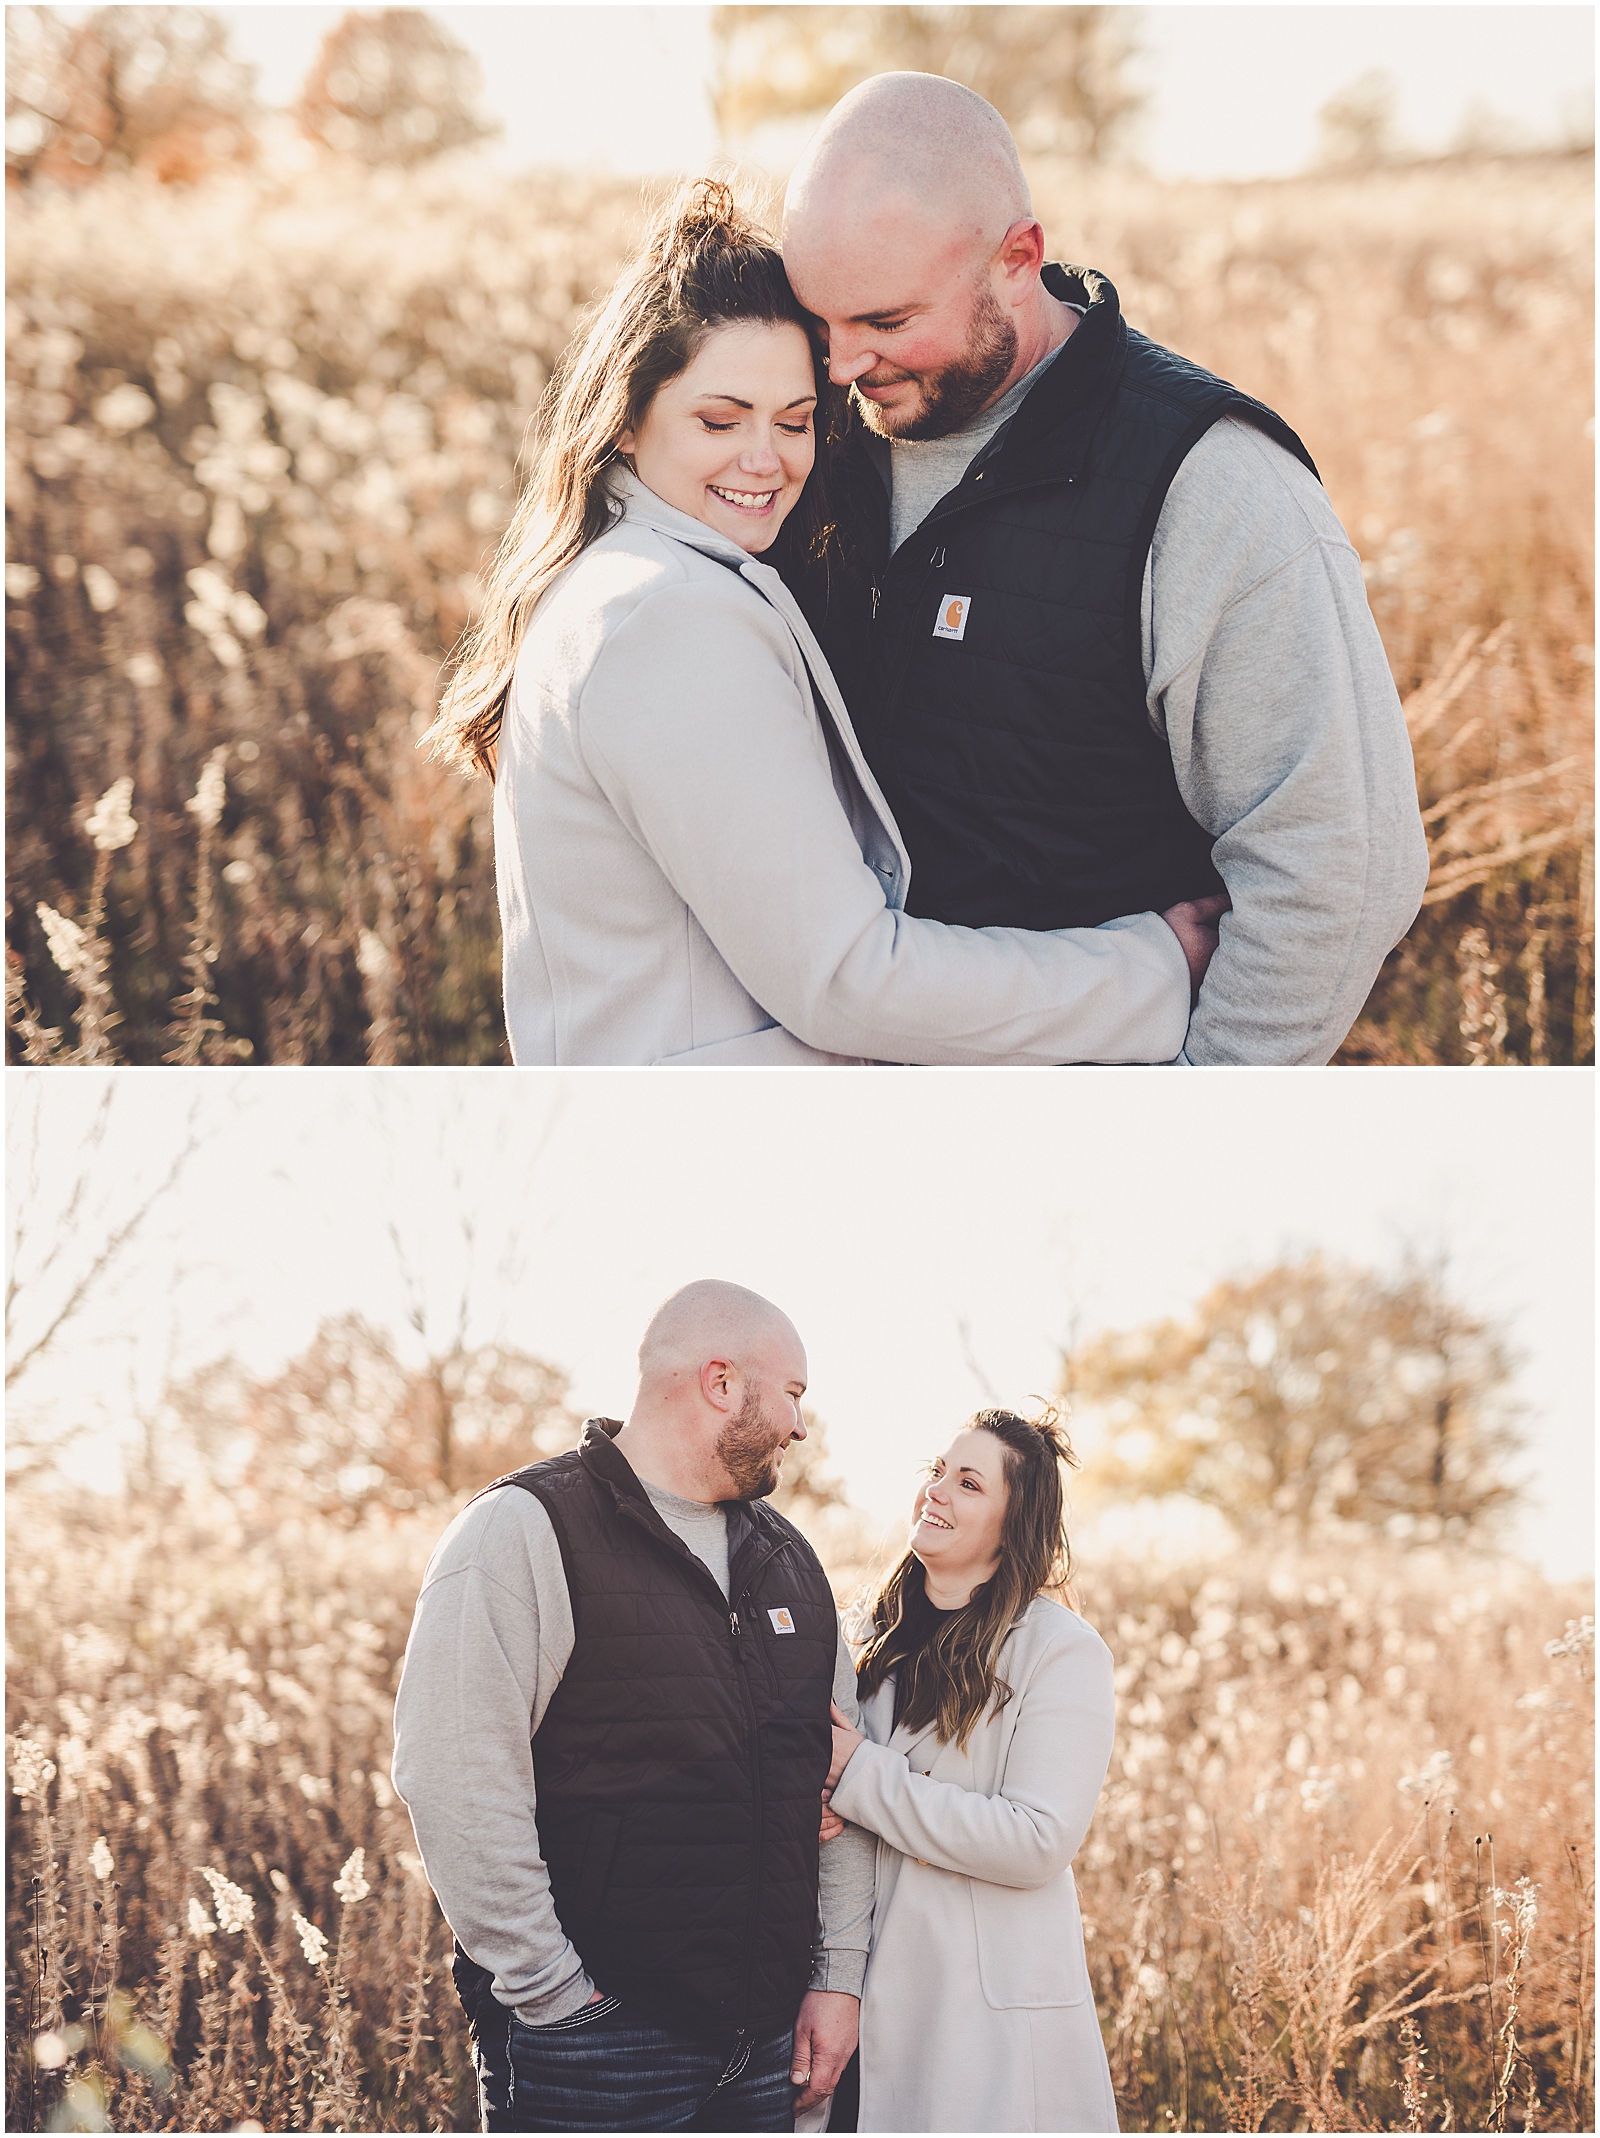 Carol and Casey's fall Perry Farm engagement in Bourbonnais, Illinois with Chicagoland wedding photographer Kara Evans Photographer.